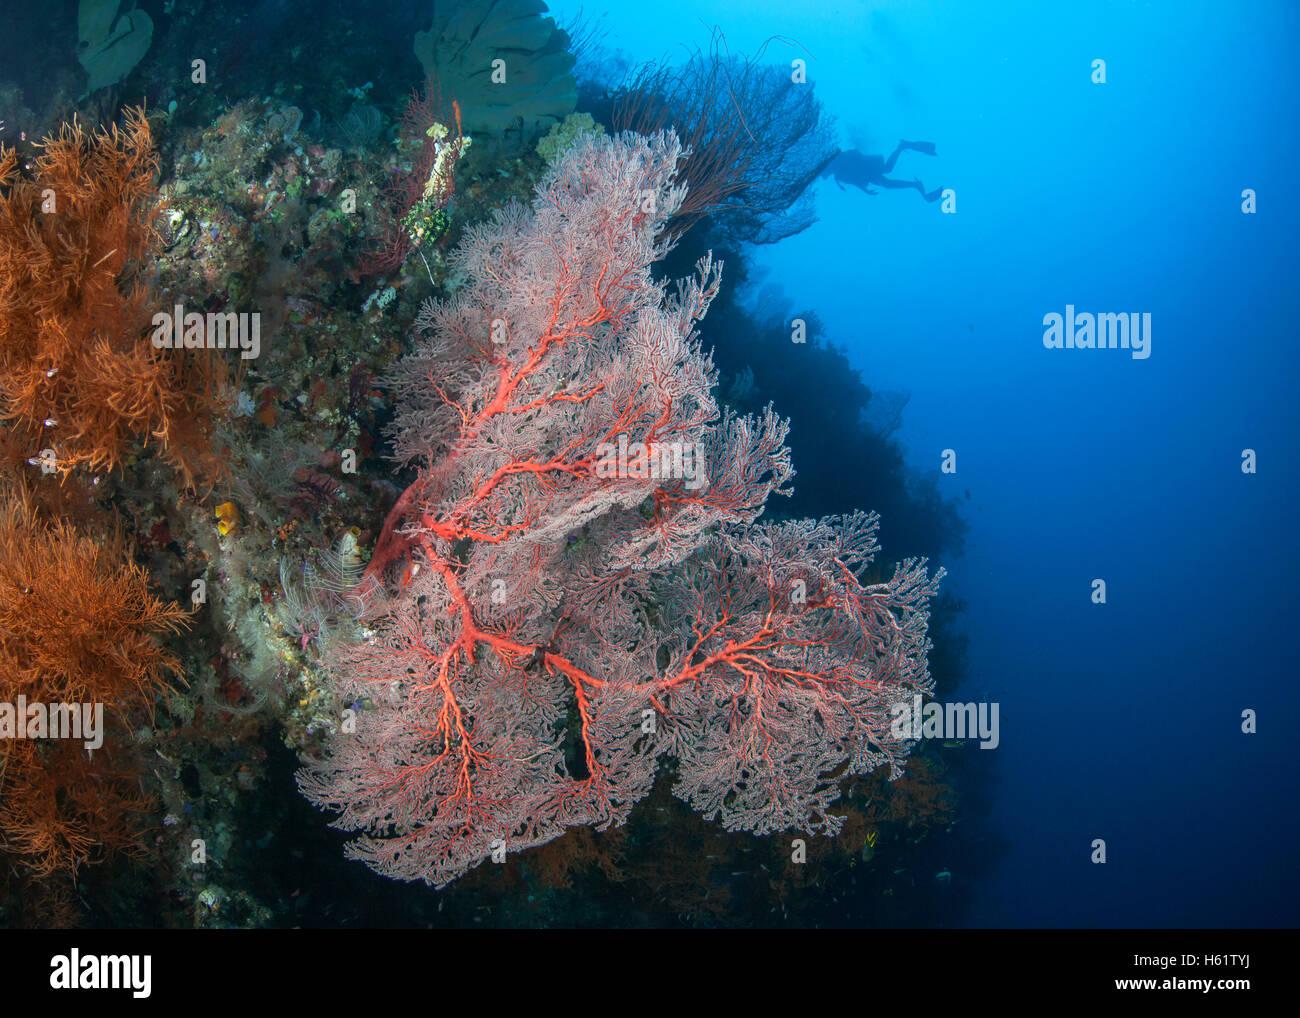 Pink Gorgonian seafan on wall reef with diver silhouette in blue water background. Stock Photo